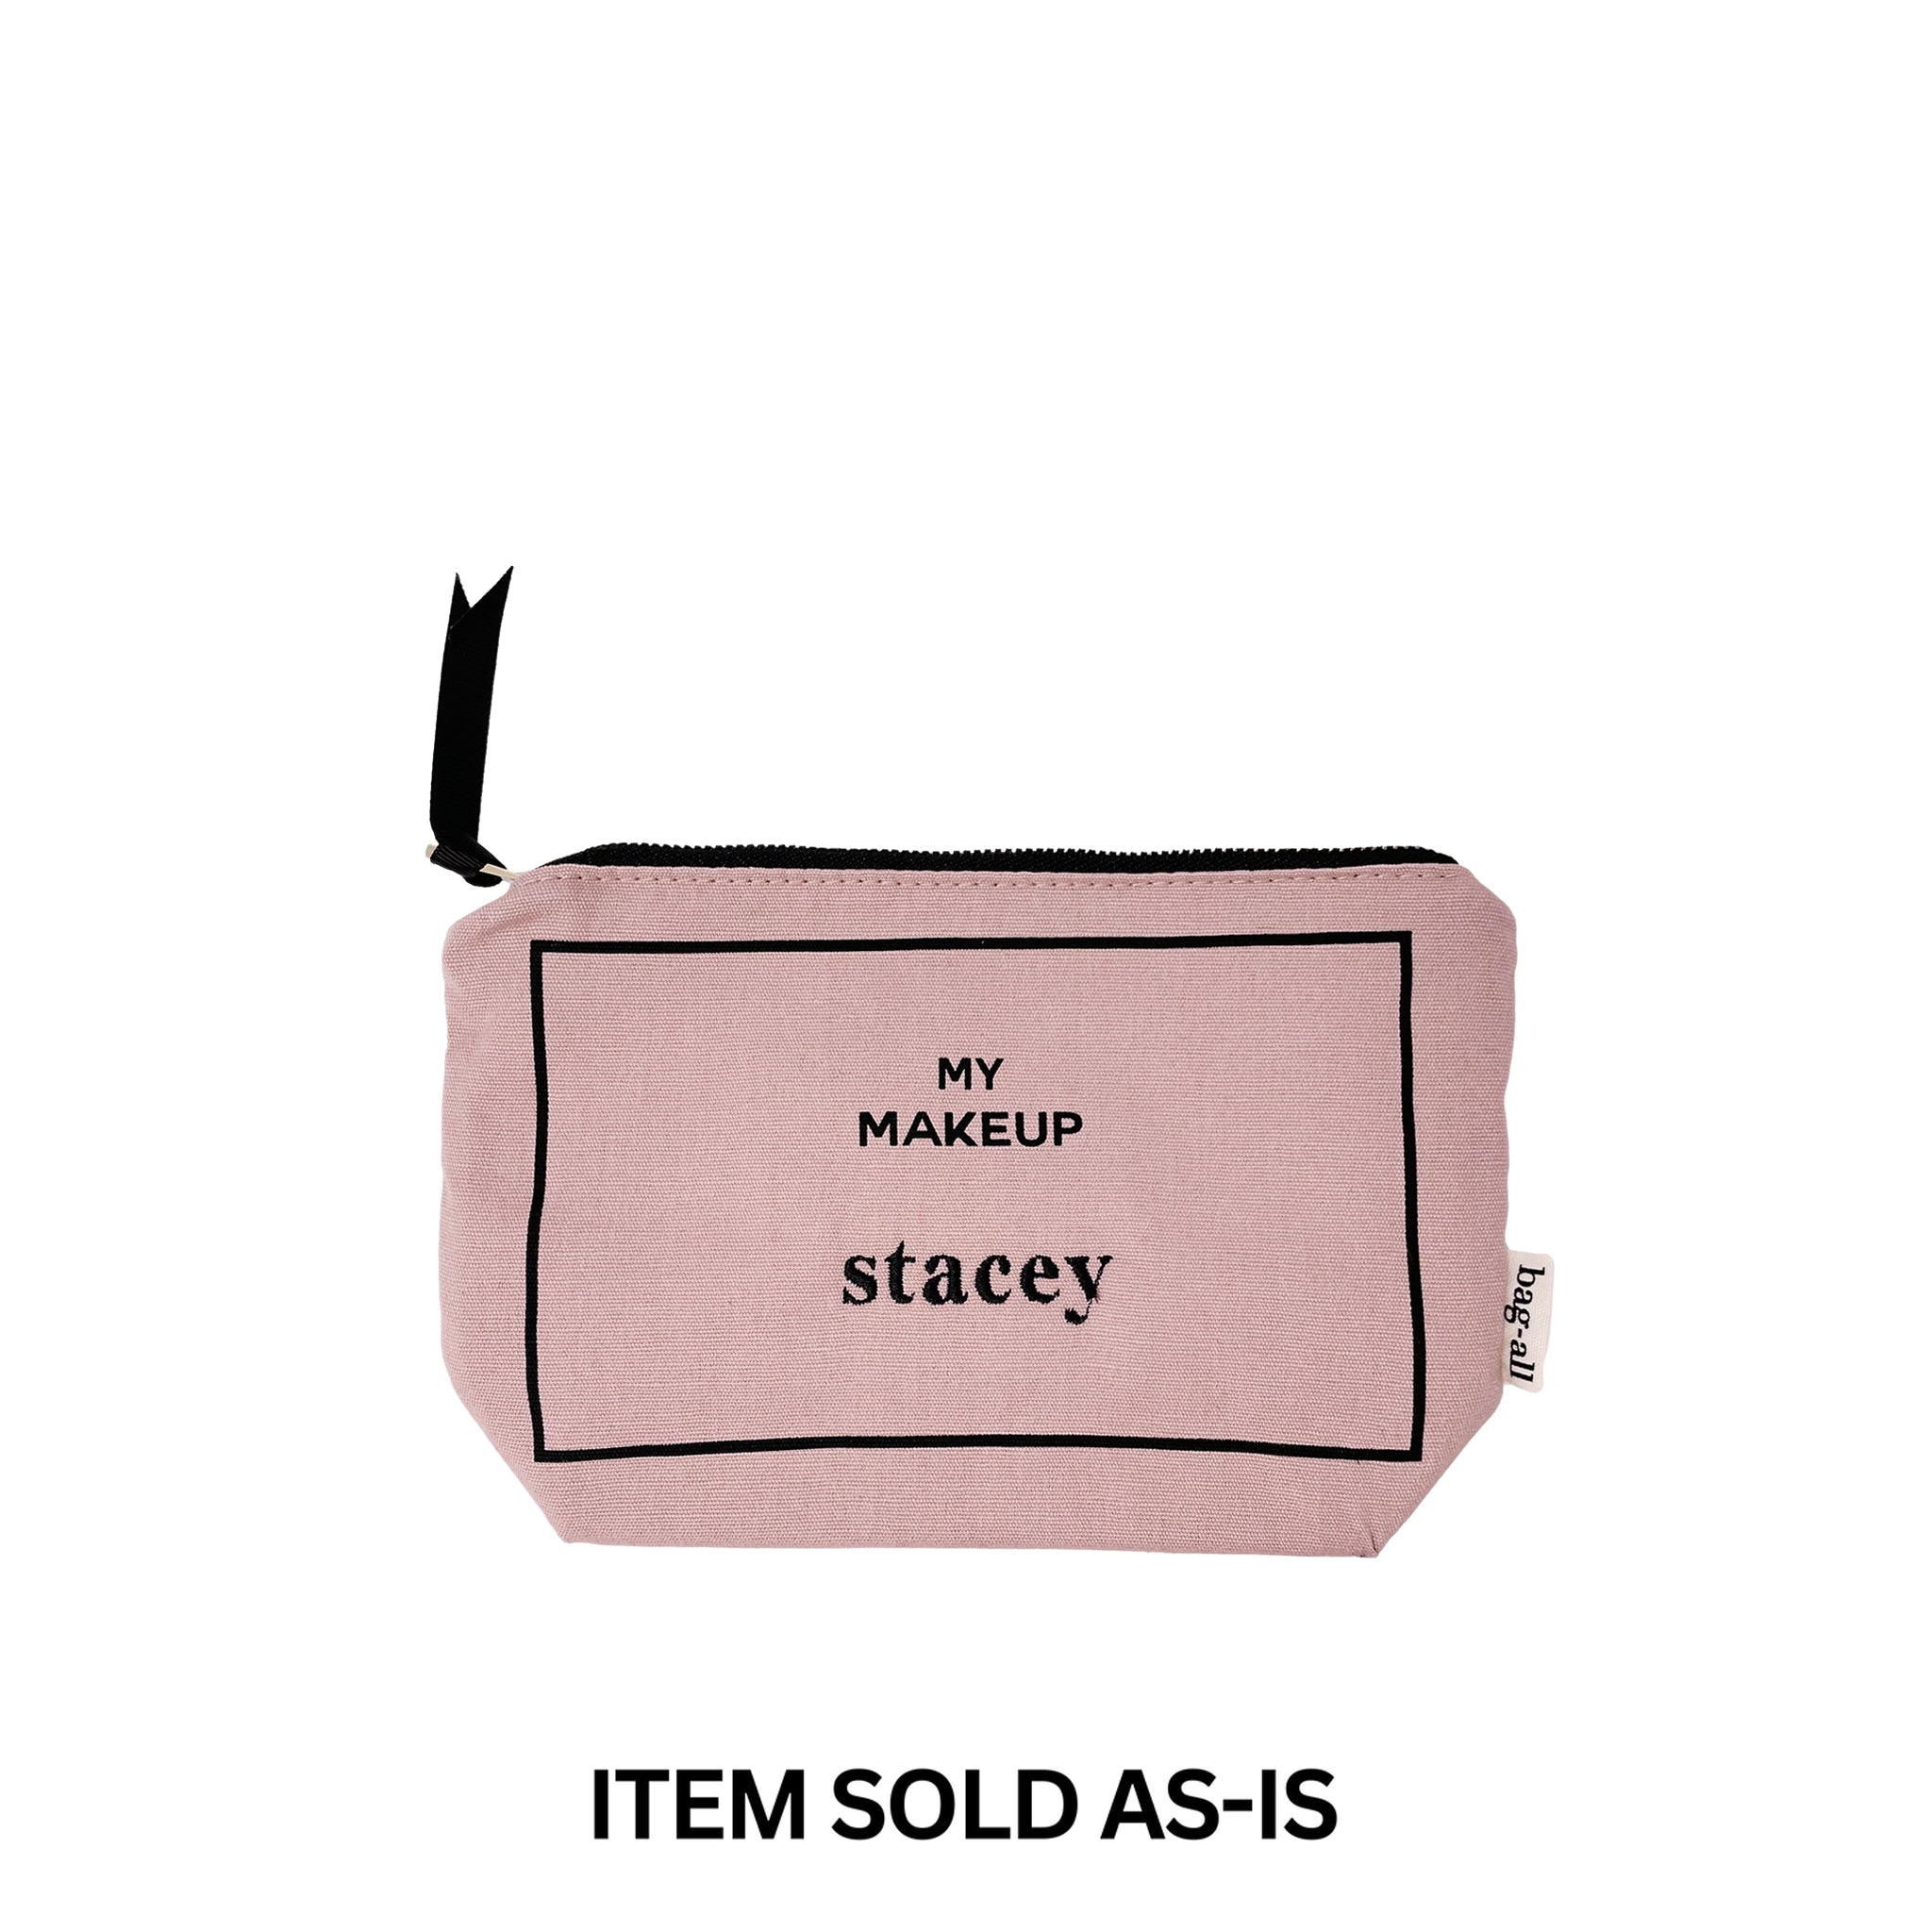 SALES BIN - My Makeup Pouch, Coated Lining Pink/Blush